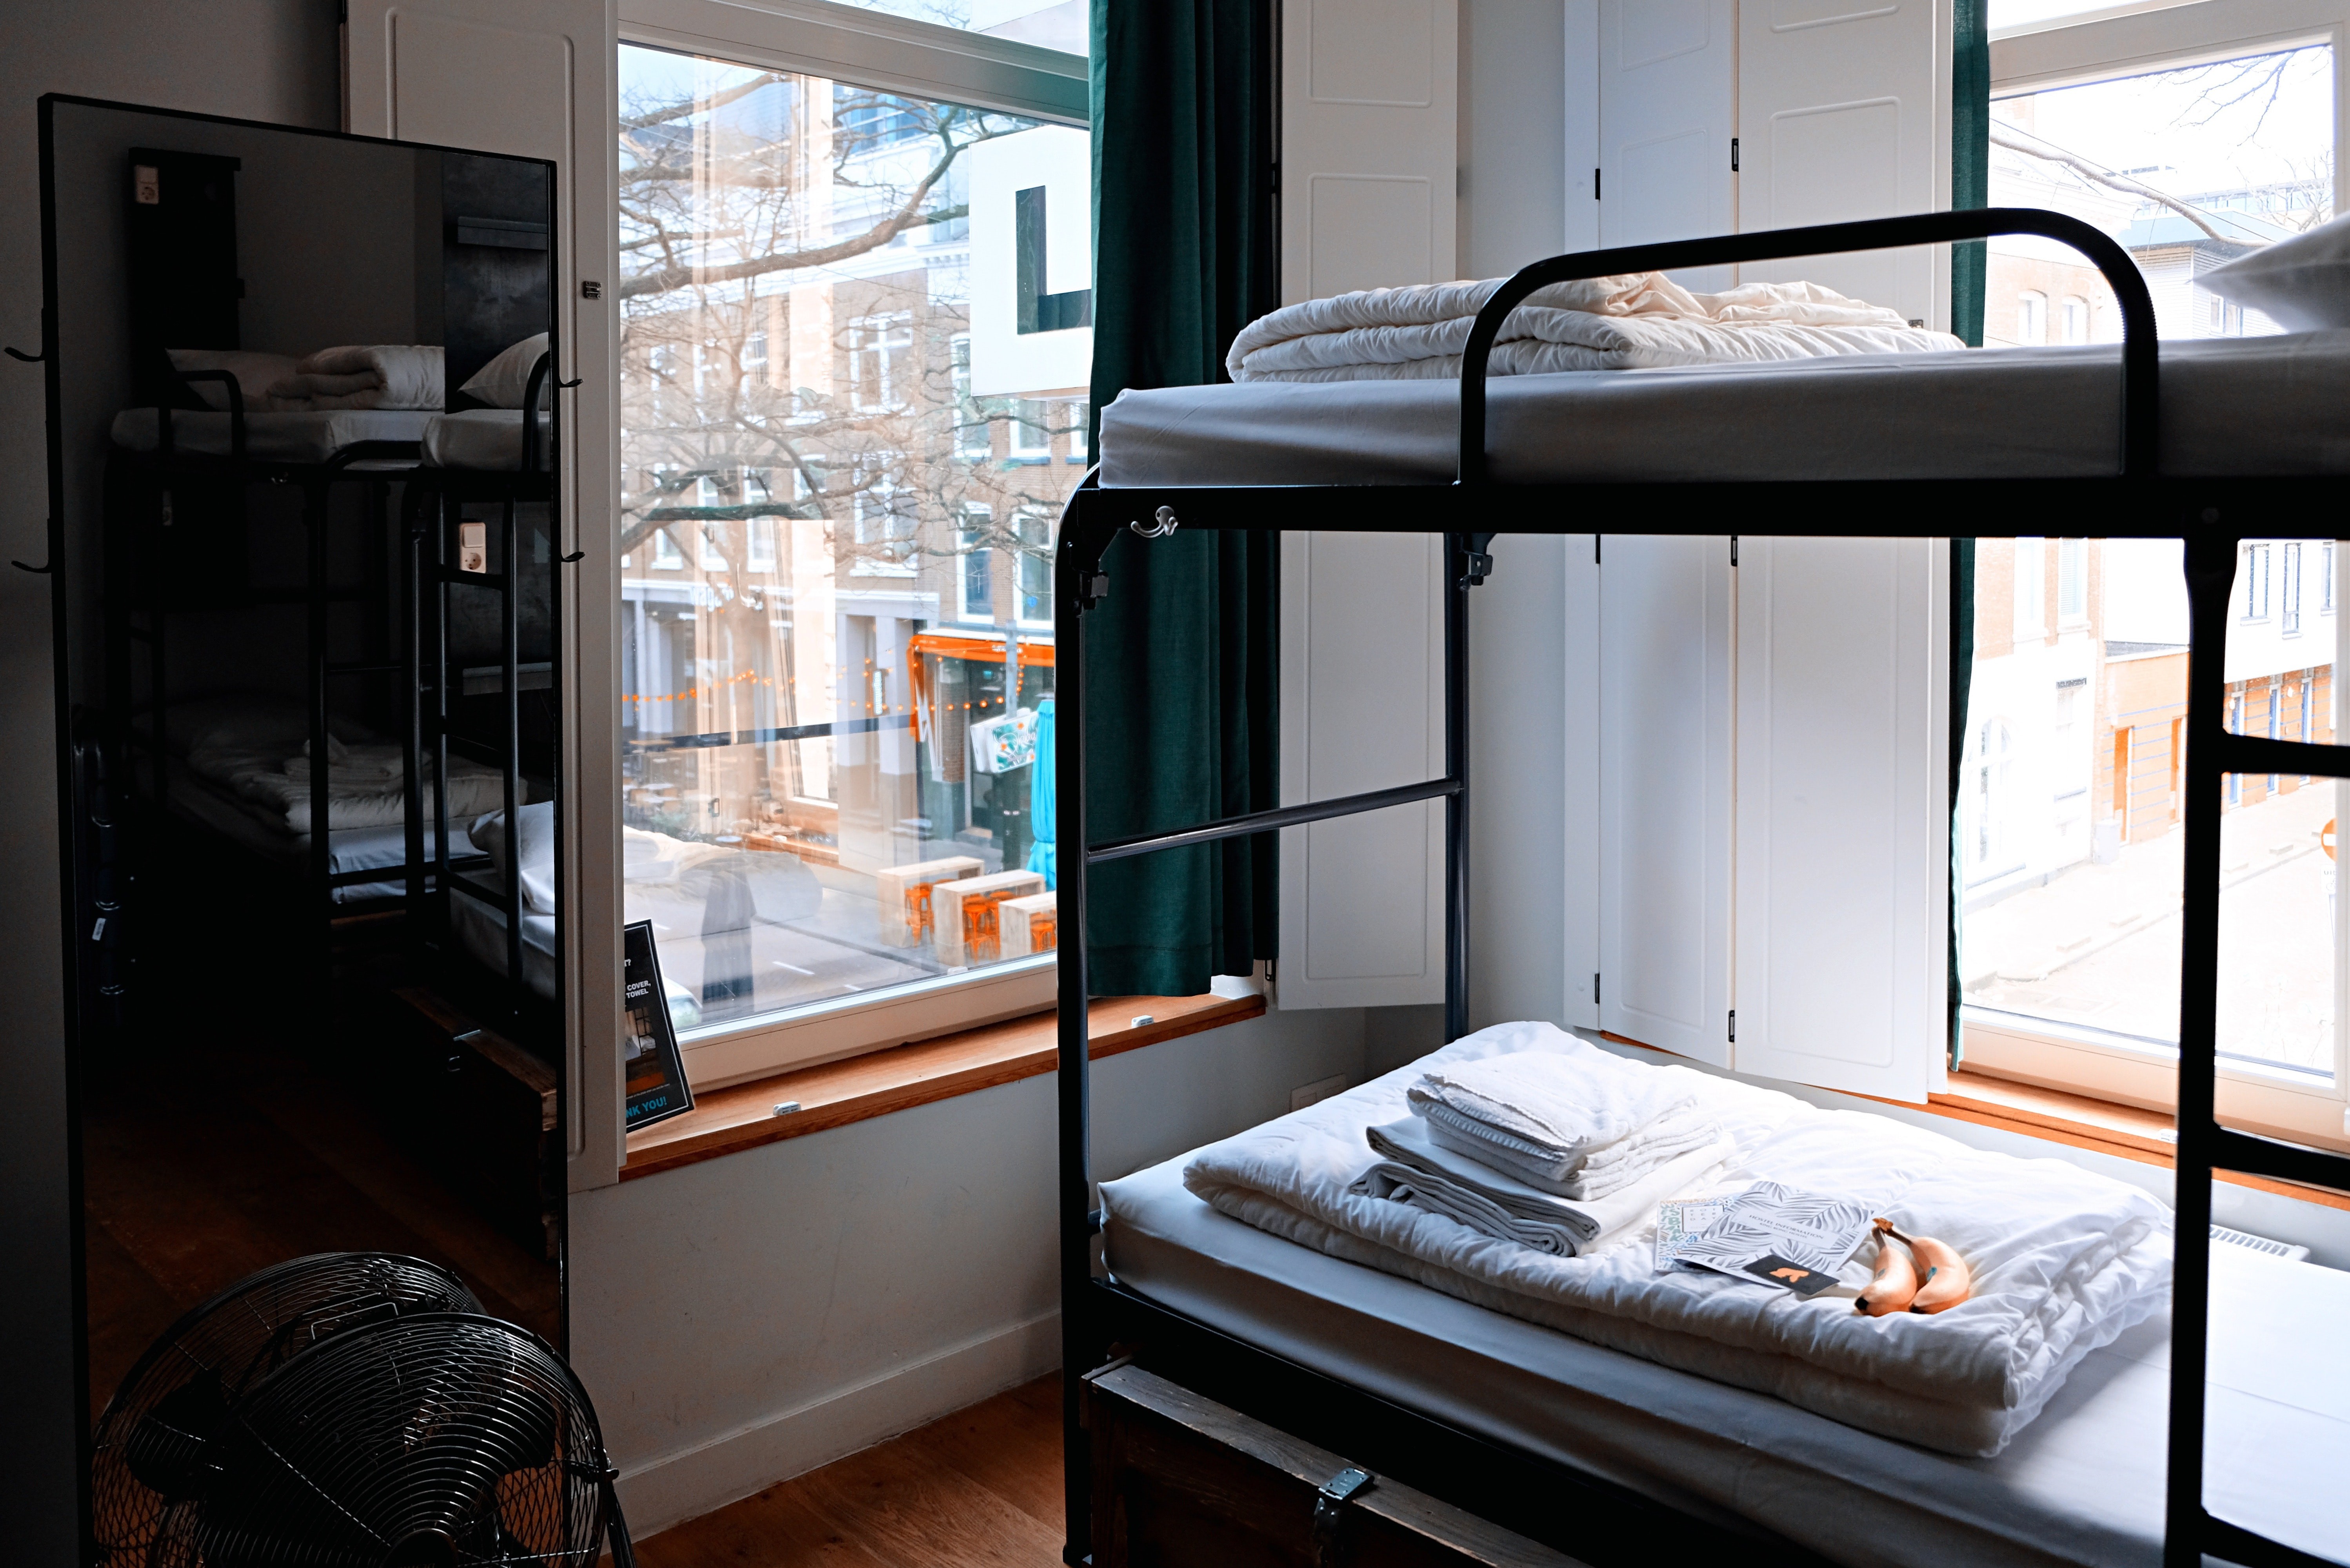 Why investors are betting big on student hostels